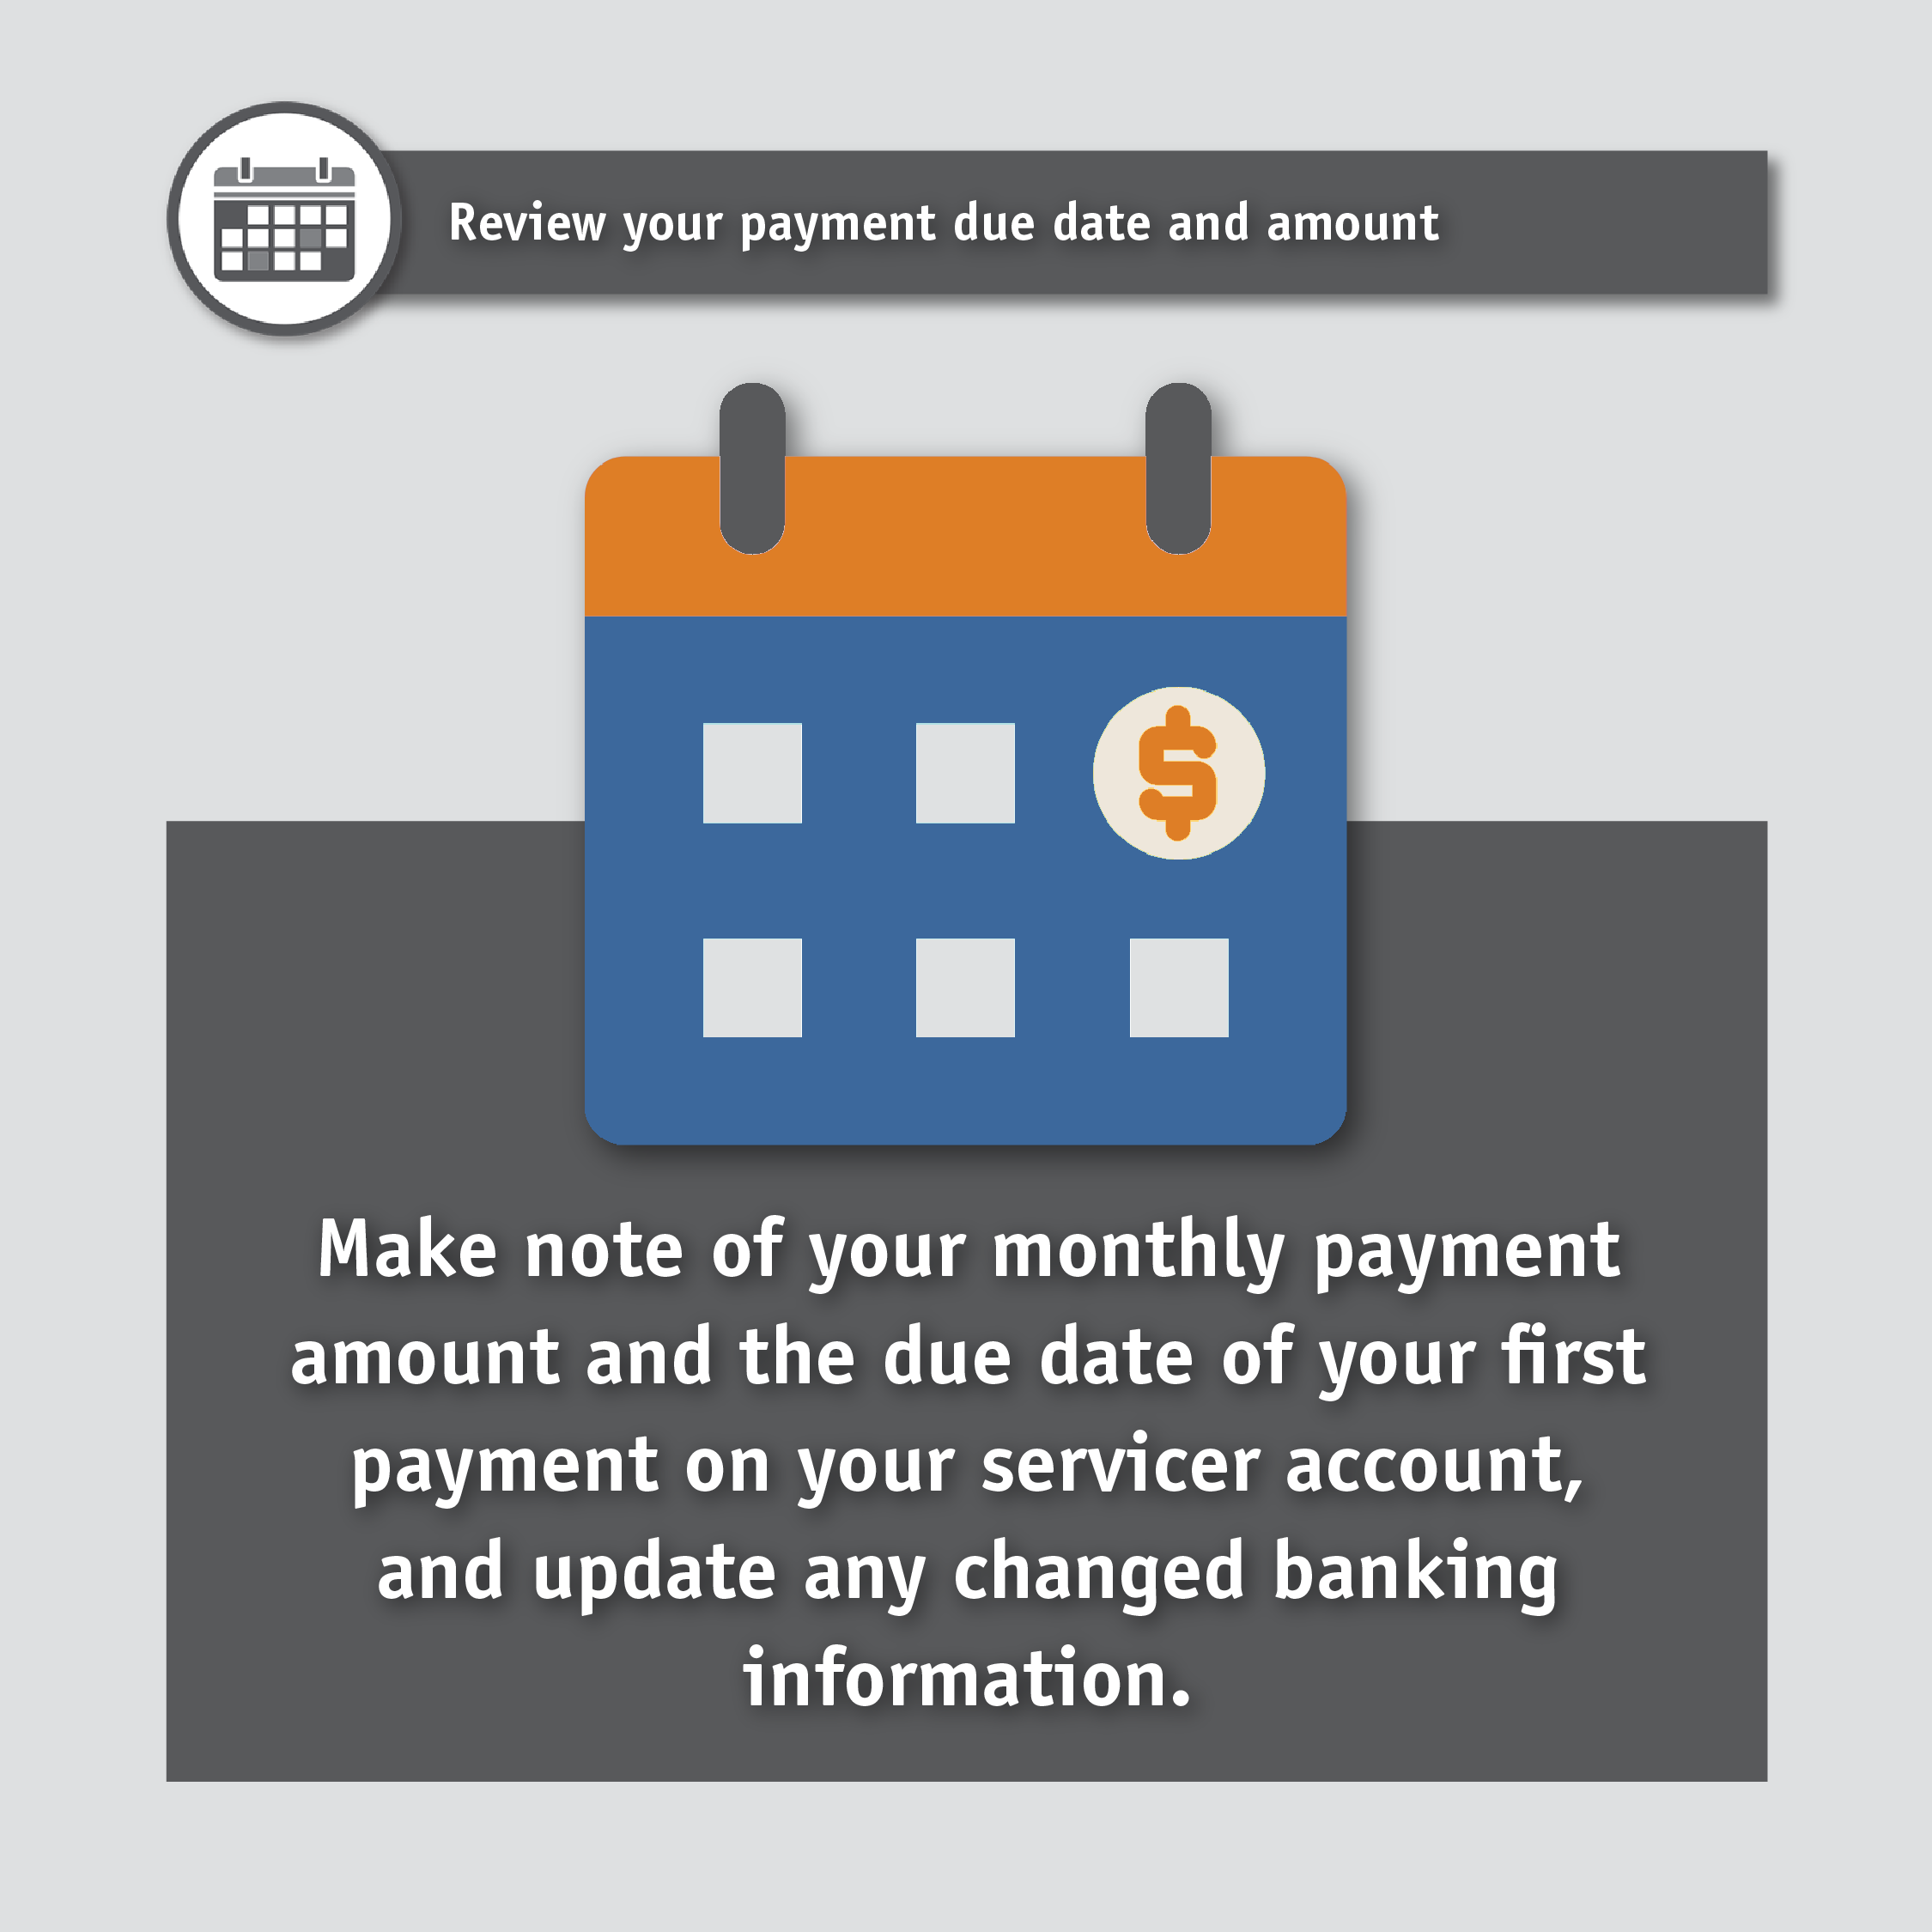 Review your payment due date and amount. Make note of your monthly payment amount and the due date of your first payment on your servicer account, and update any changed banking information.